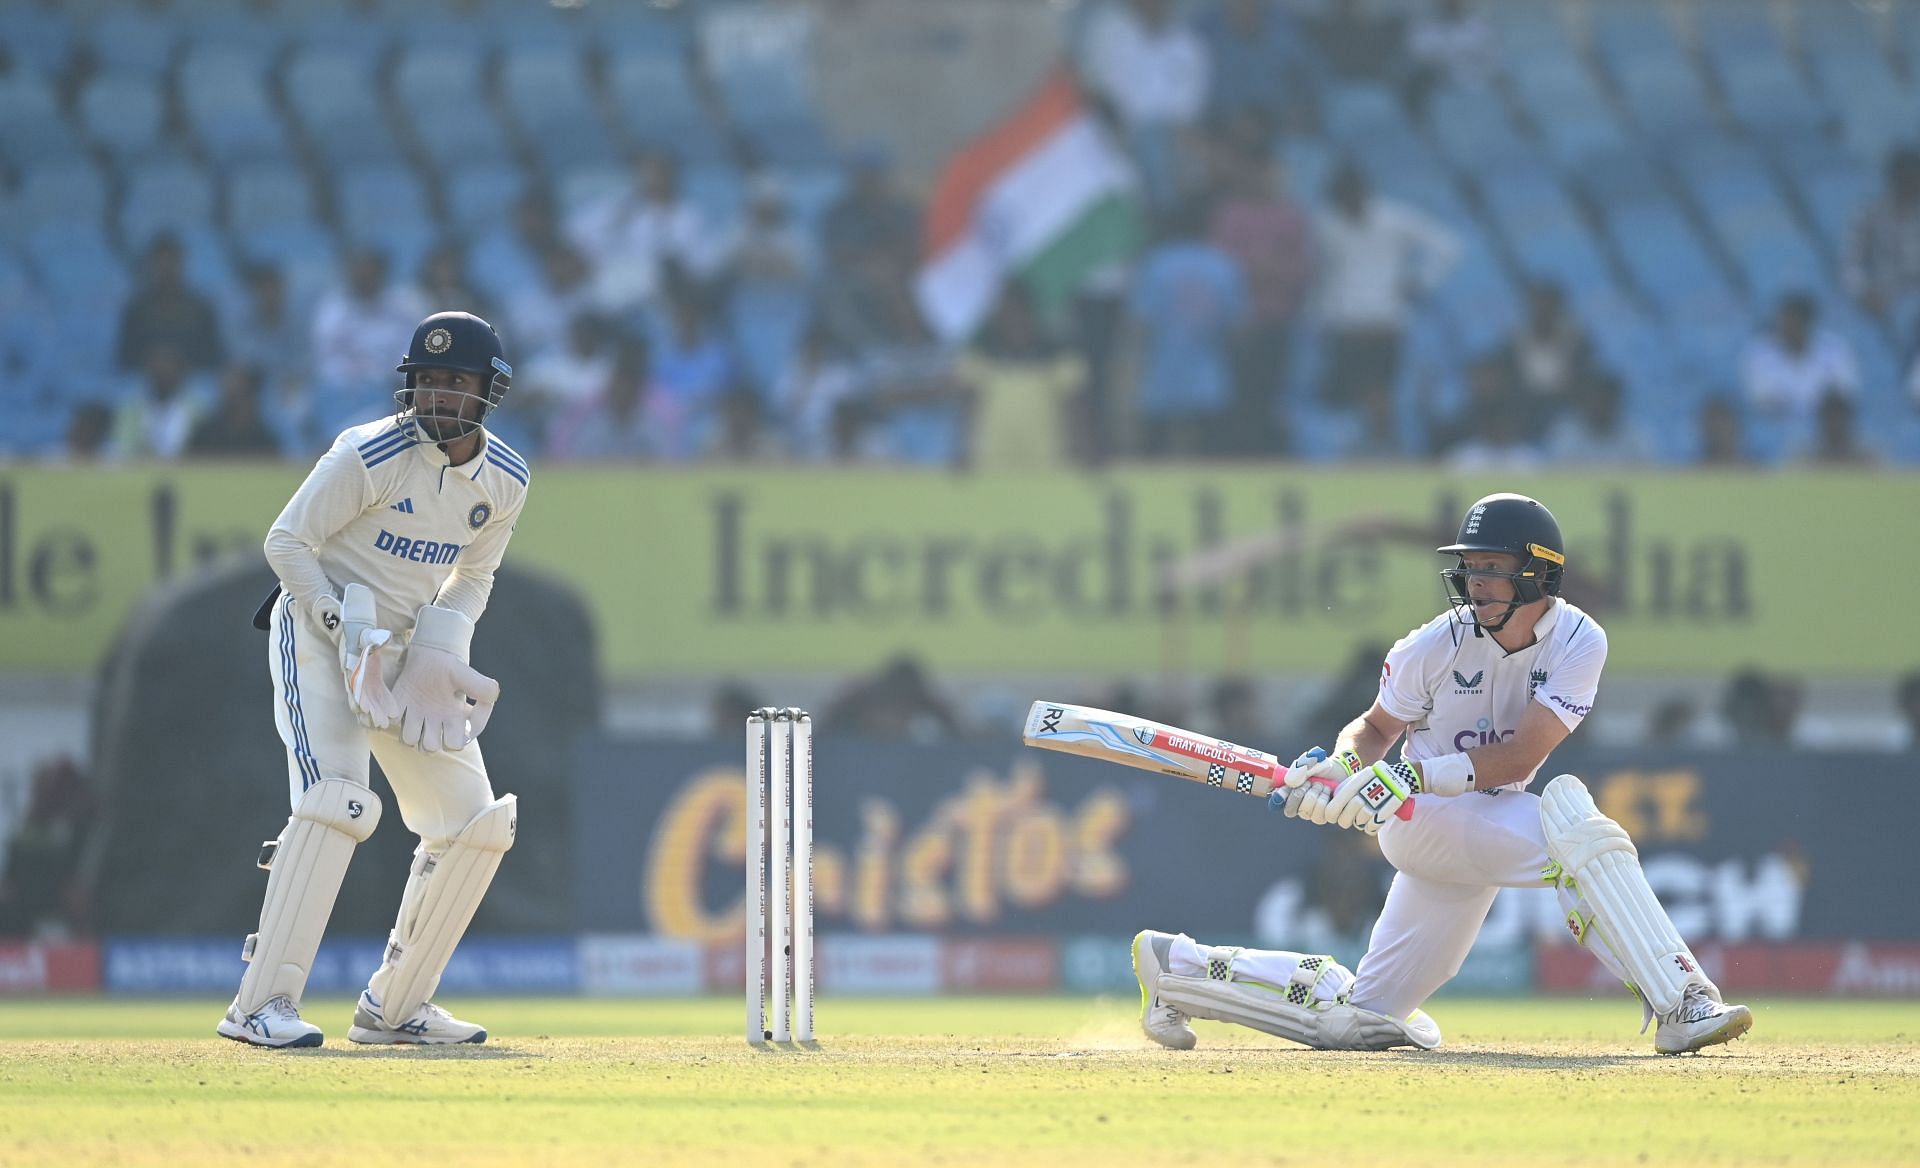 Pope single-handedly won England the opening Test at Hyderabad with unorthodox shots.